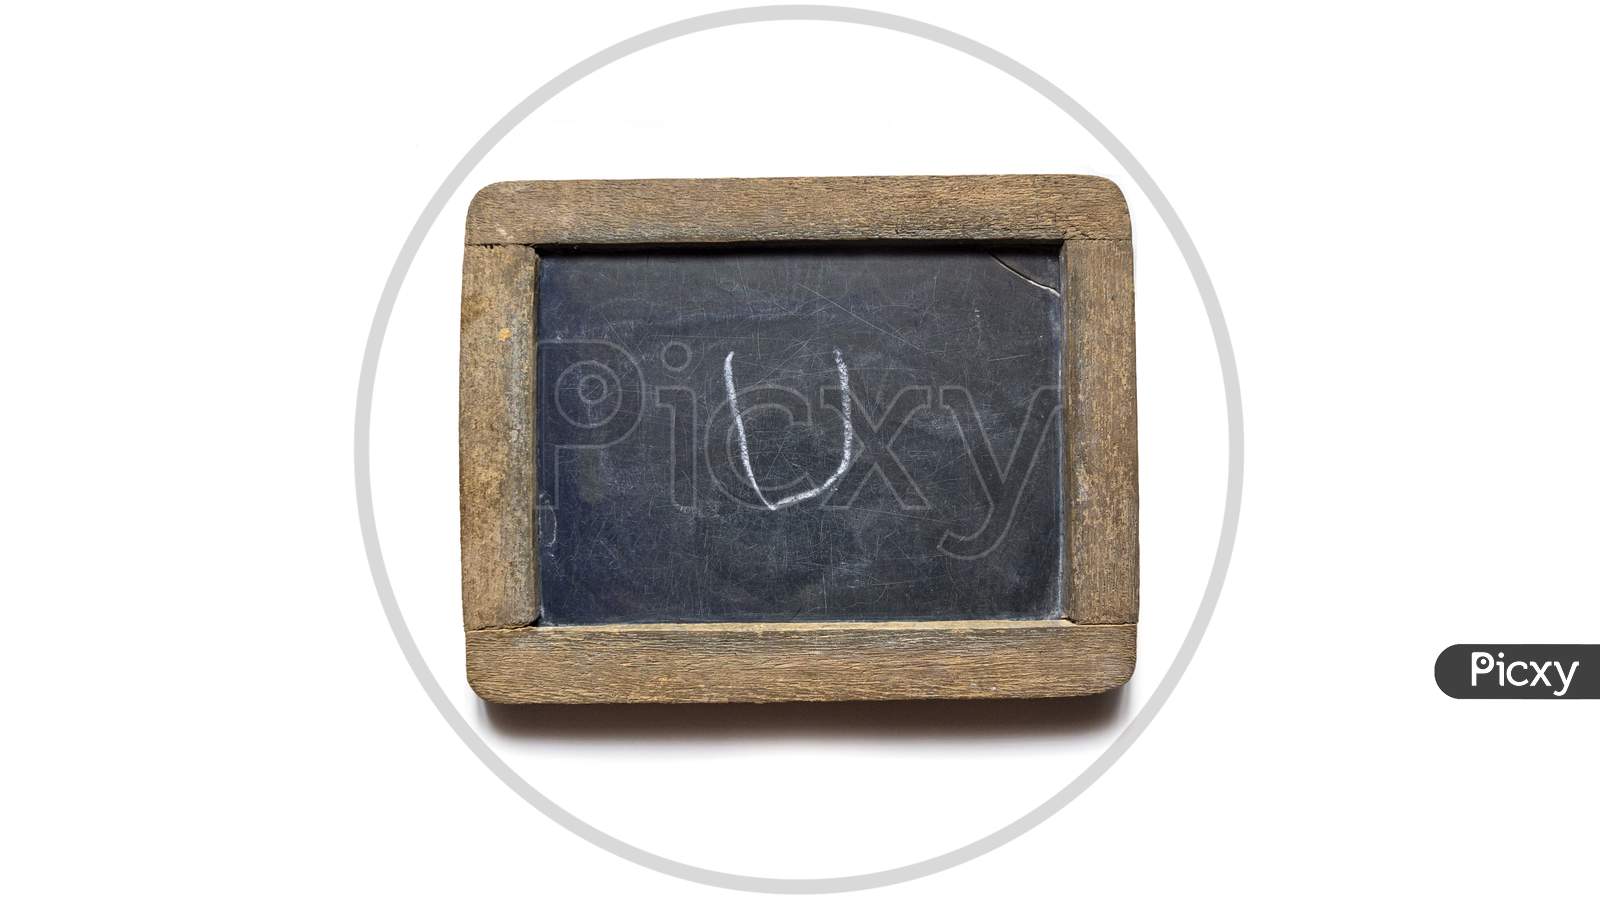 Wooden Slate With English Letter U